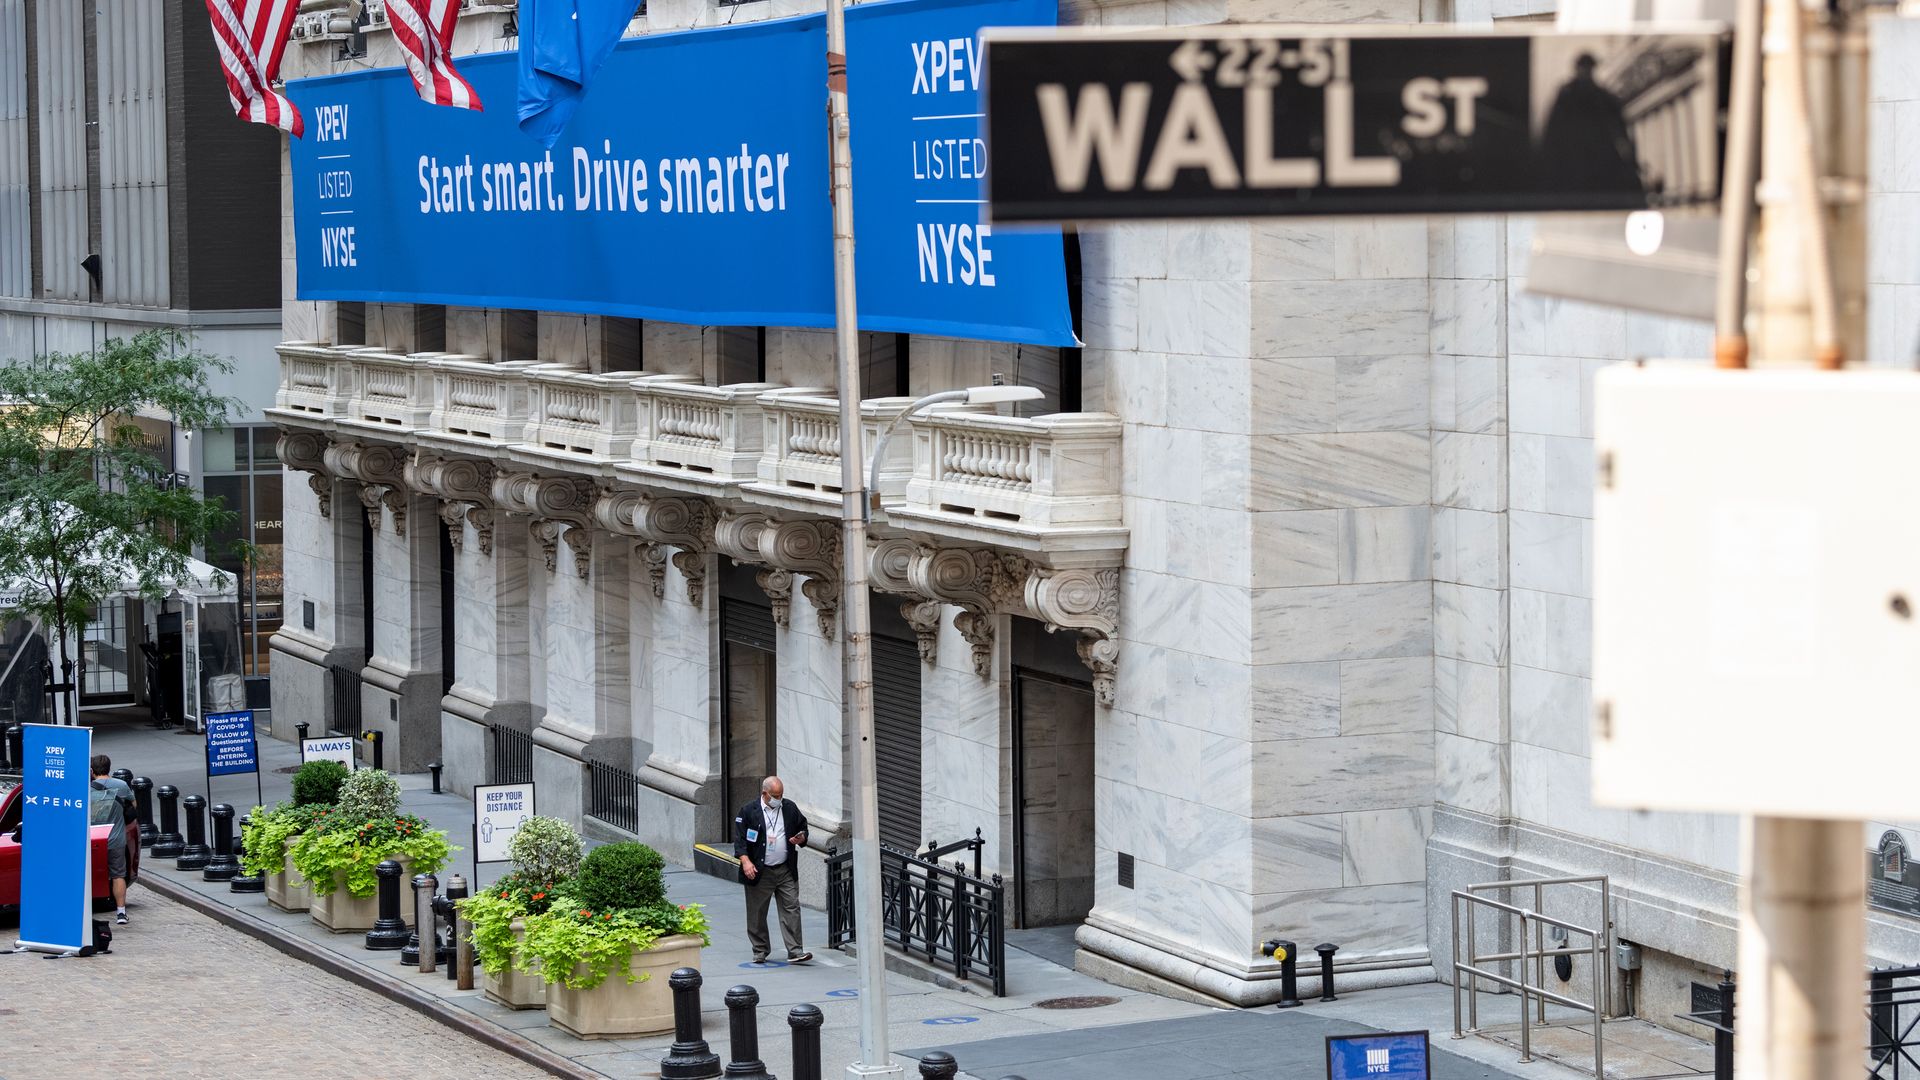 A sign for "Wall Street" in New York City, with a trader wearing a mask leaving the New York Stock Exchange in the distance